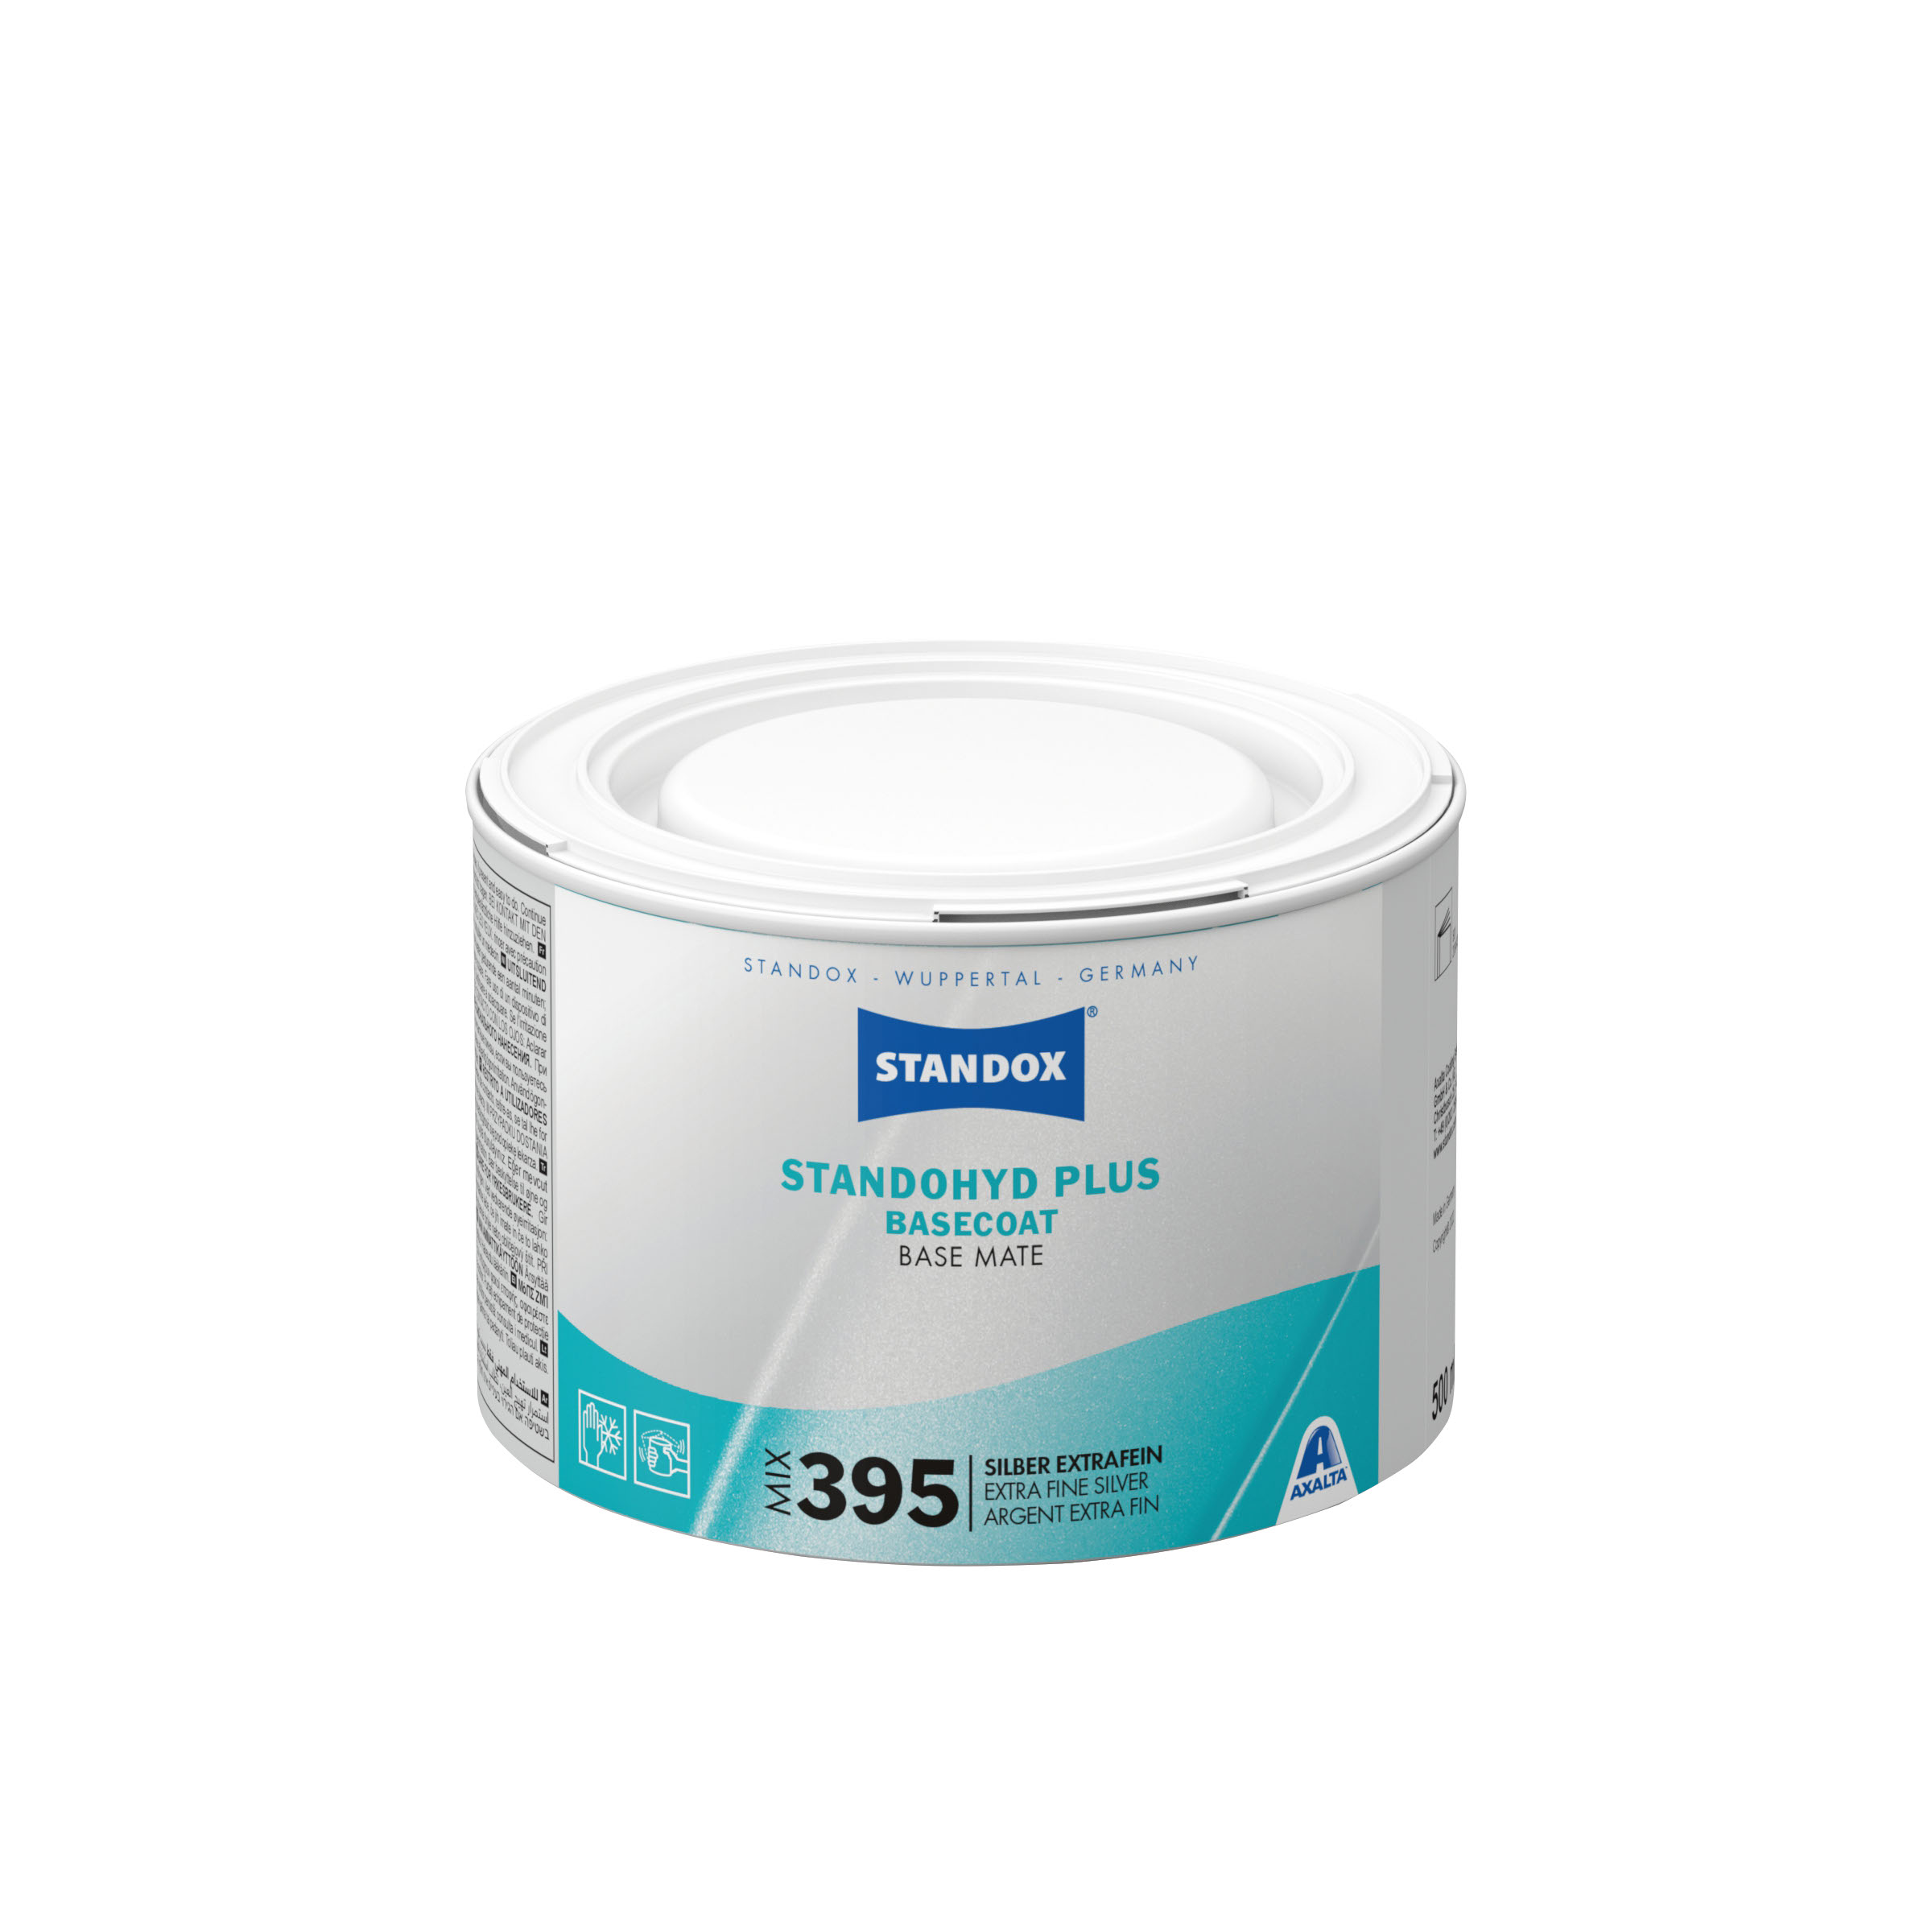 Standohyd Plus Basecoat Mix 395 silber, extra fein